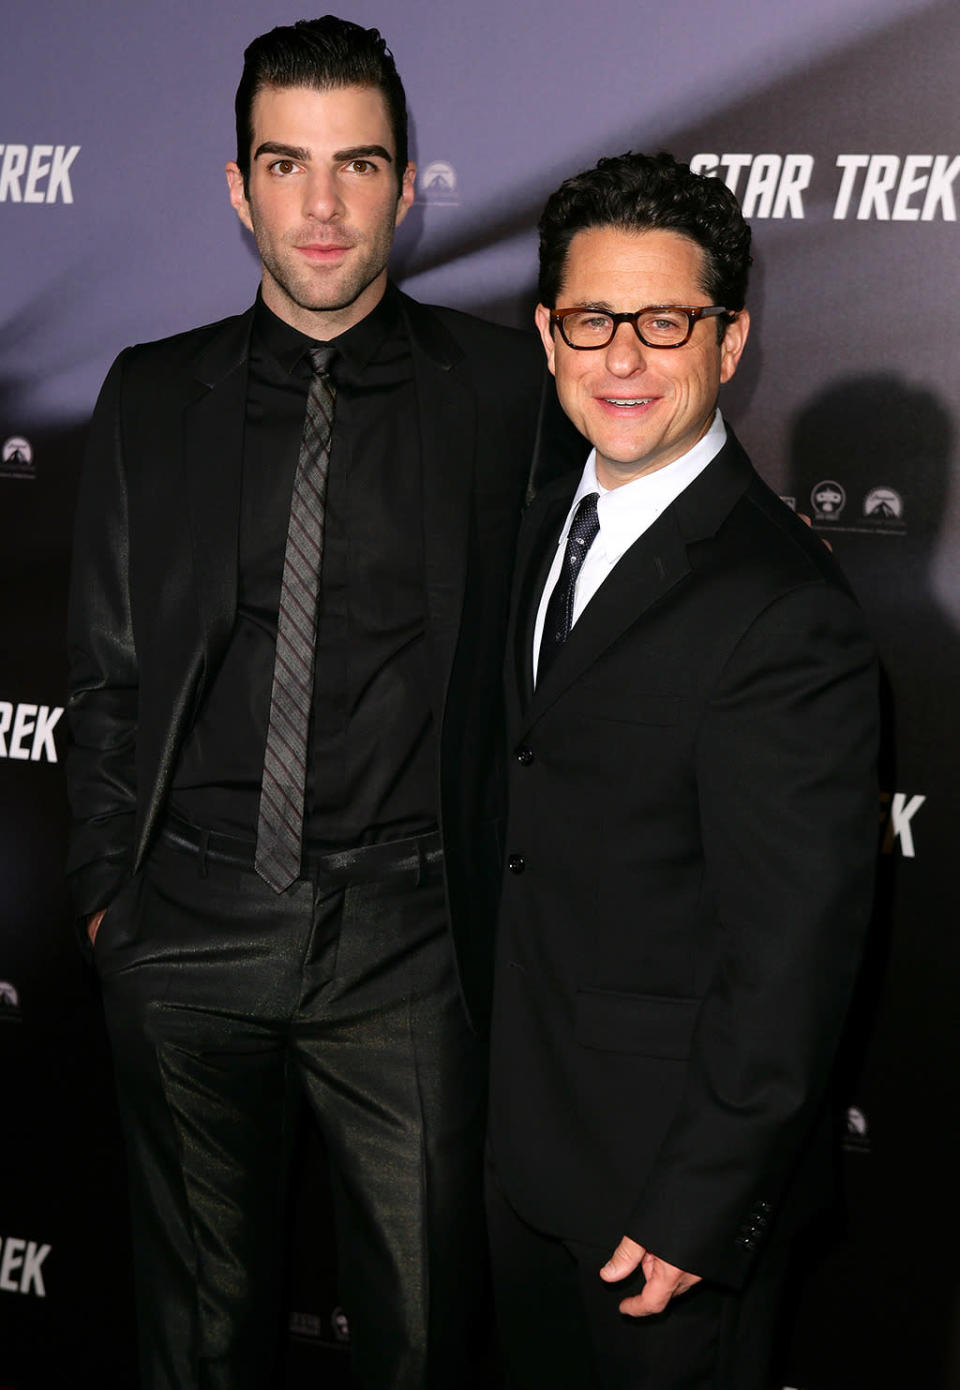 <p>Zachary Quinto with director J.J. Abrams in Sydney. Quinto arguably had the most difficult role in filling Leonard Nimoy’s impossibly large shoes as Spock. <i>(Photo: Don Arnold/WireImage)</i></p>